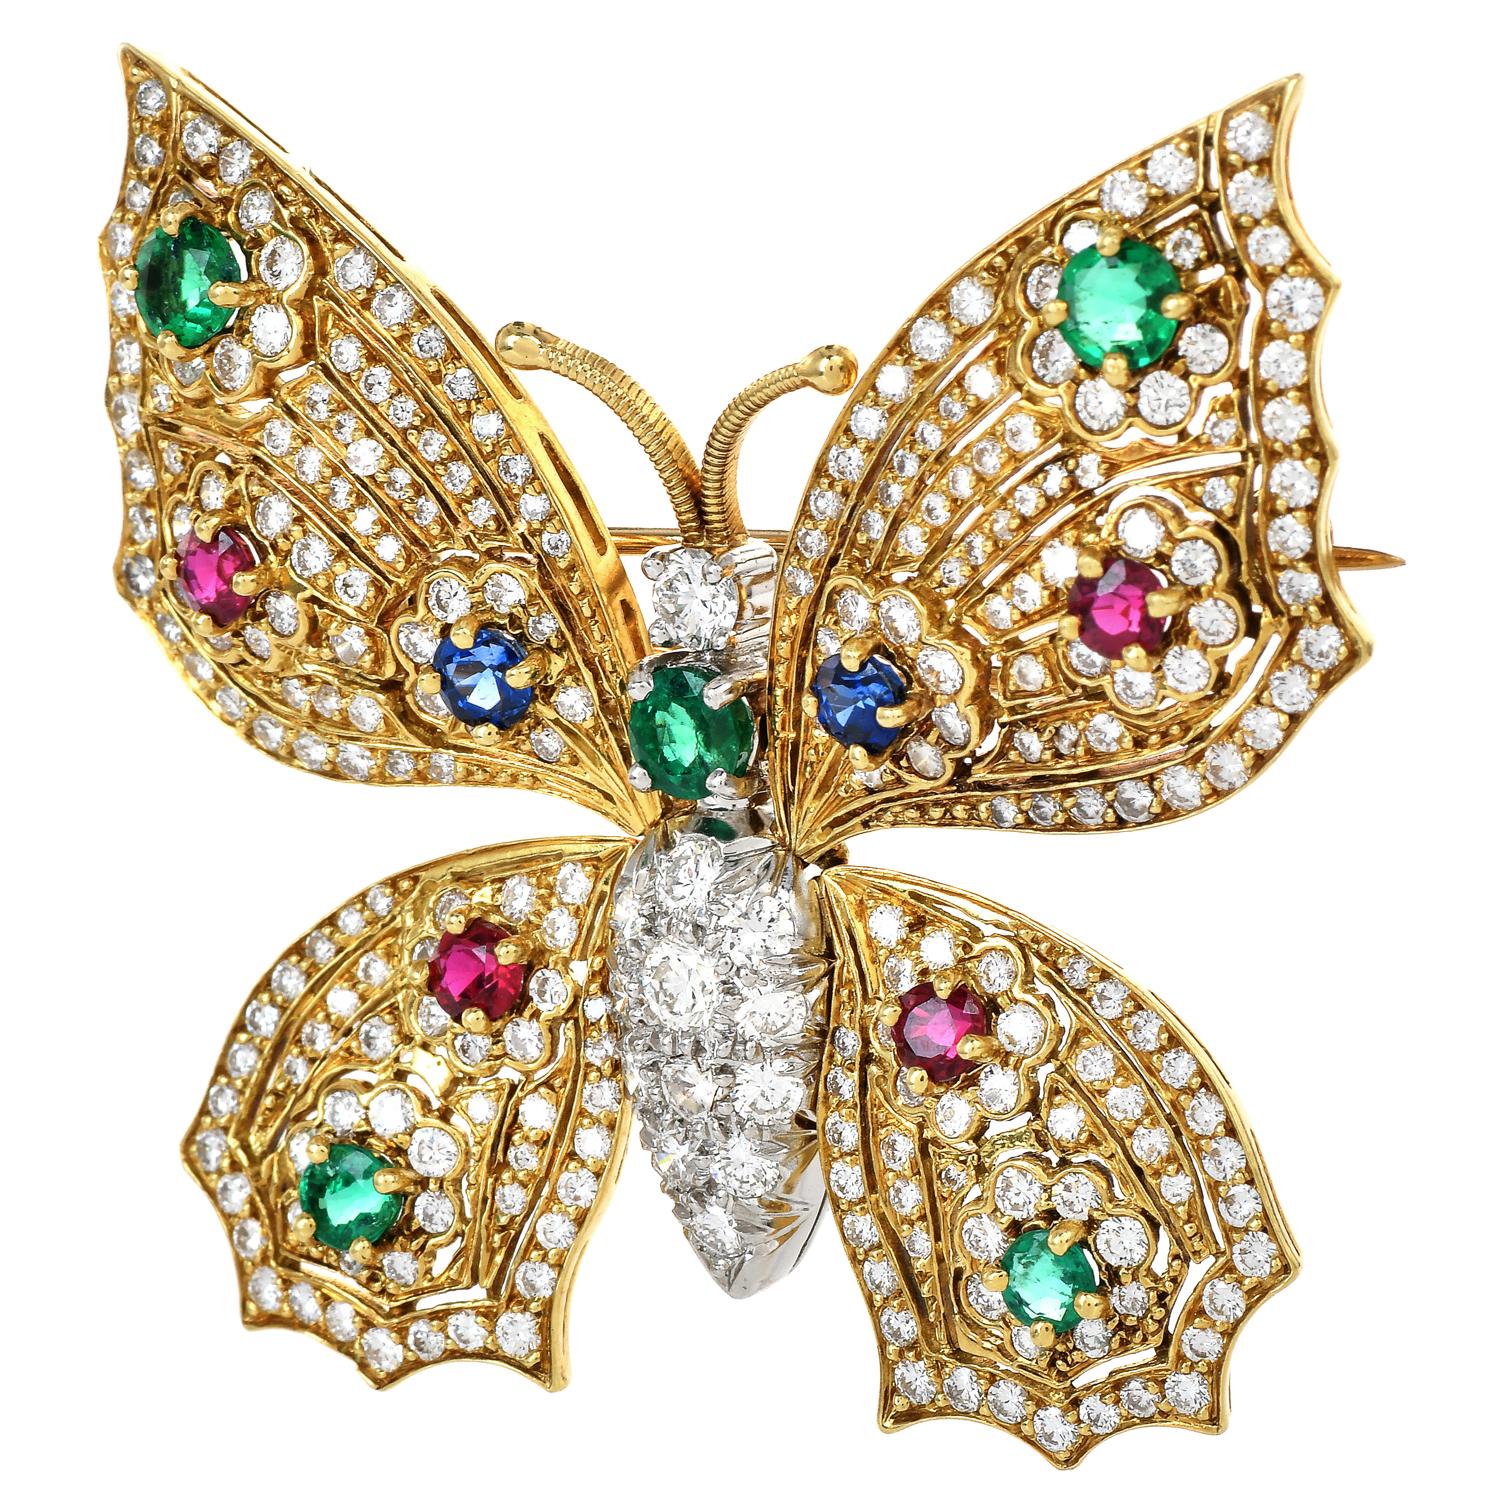 A display of color with vivid Blue, Red, and Green, enhanced by the sternal sparkle of the Diamonds, this beautiful butterfly brooch is perfect to wear with your favorite scarf.

This beautiful brooch is crafted in solid 18K yellow gold & center